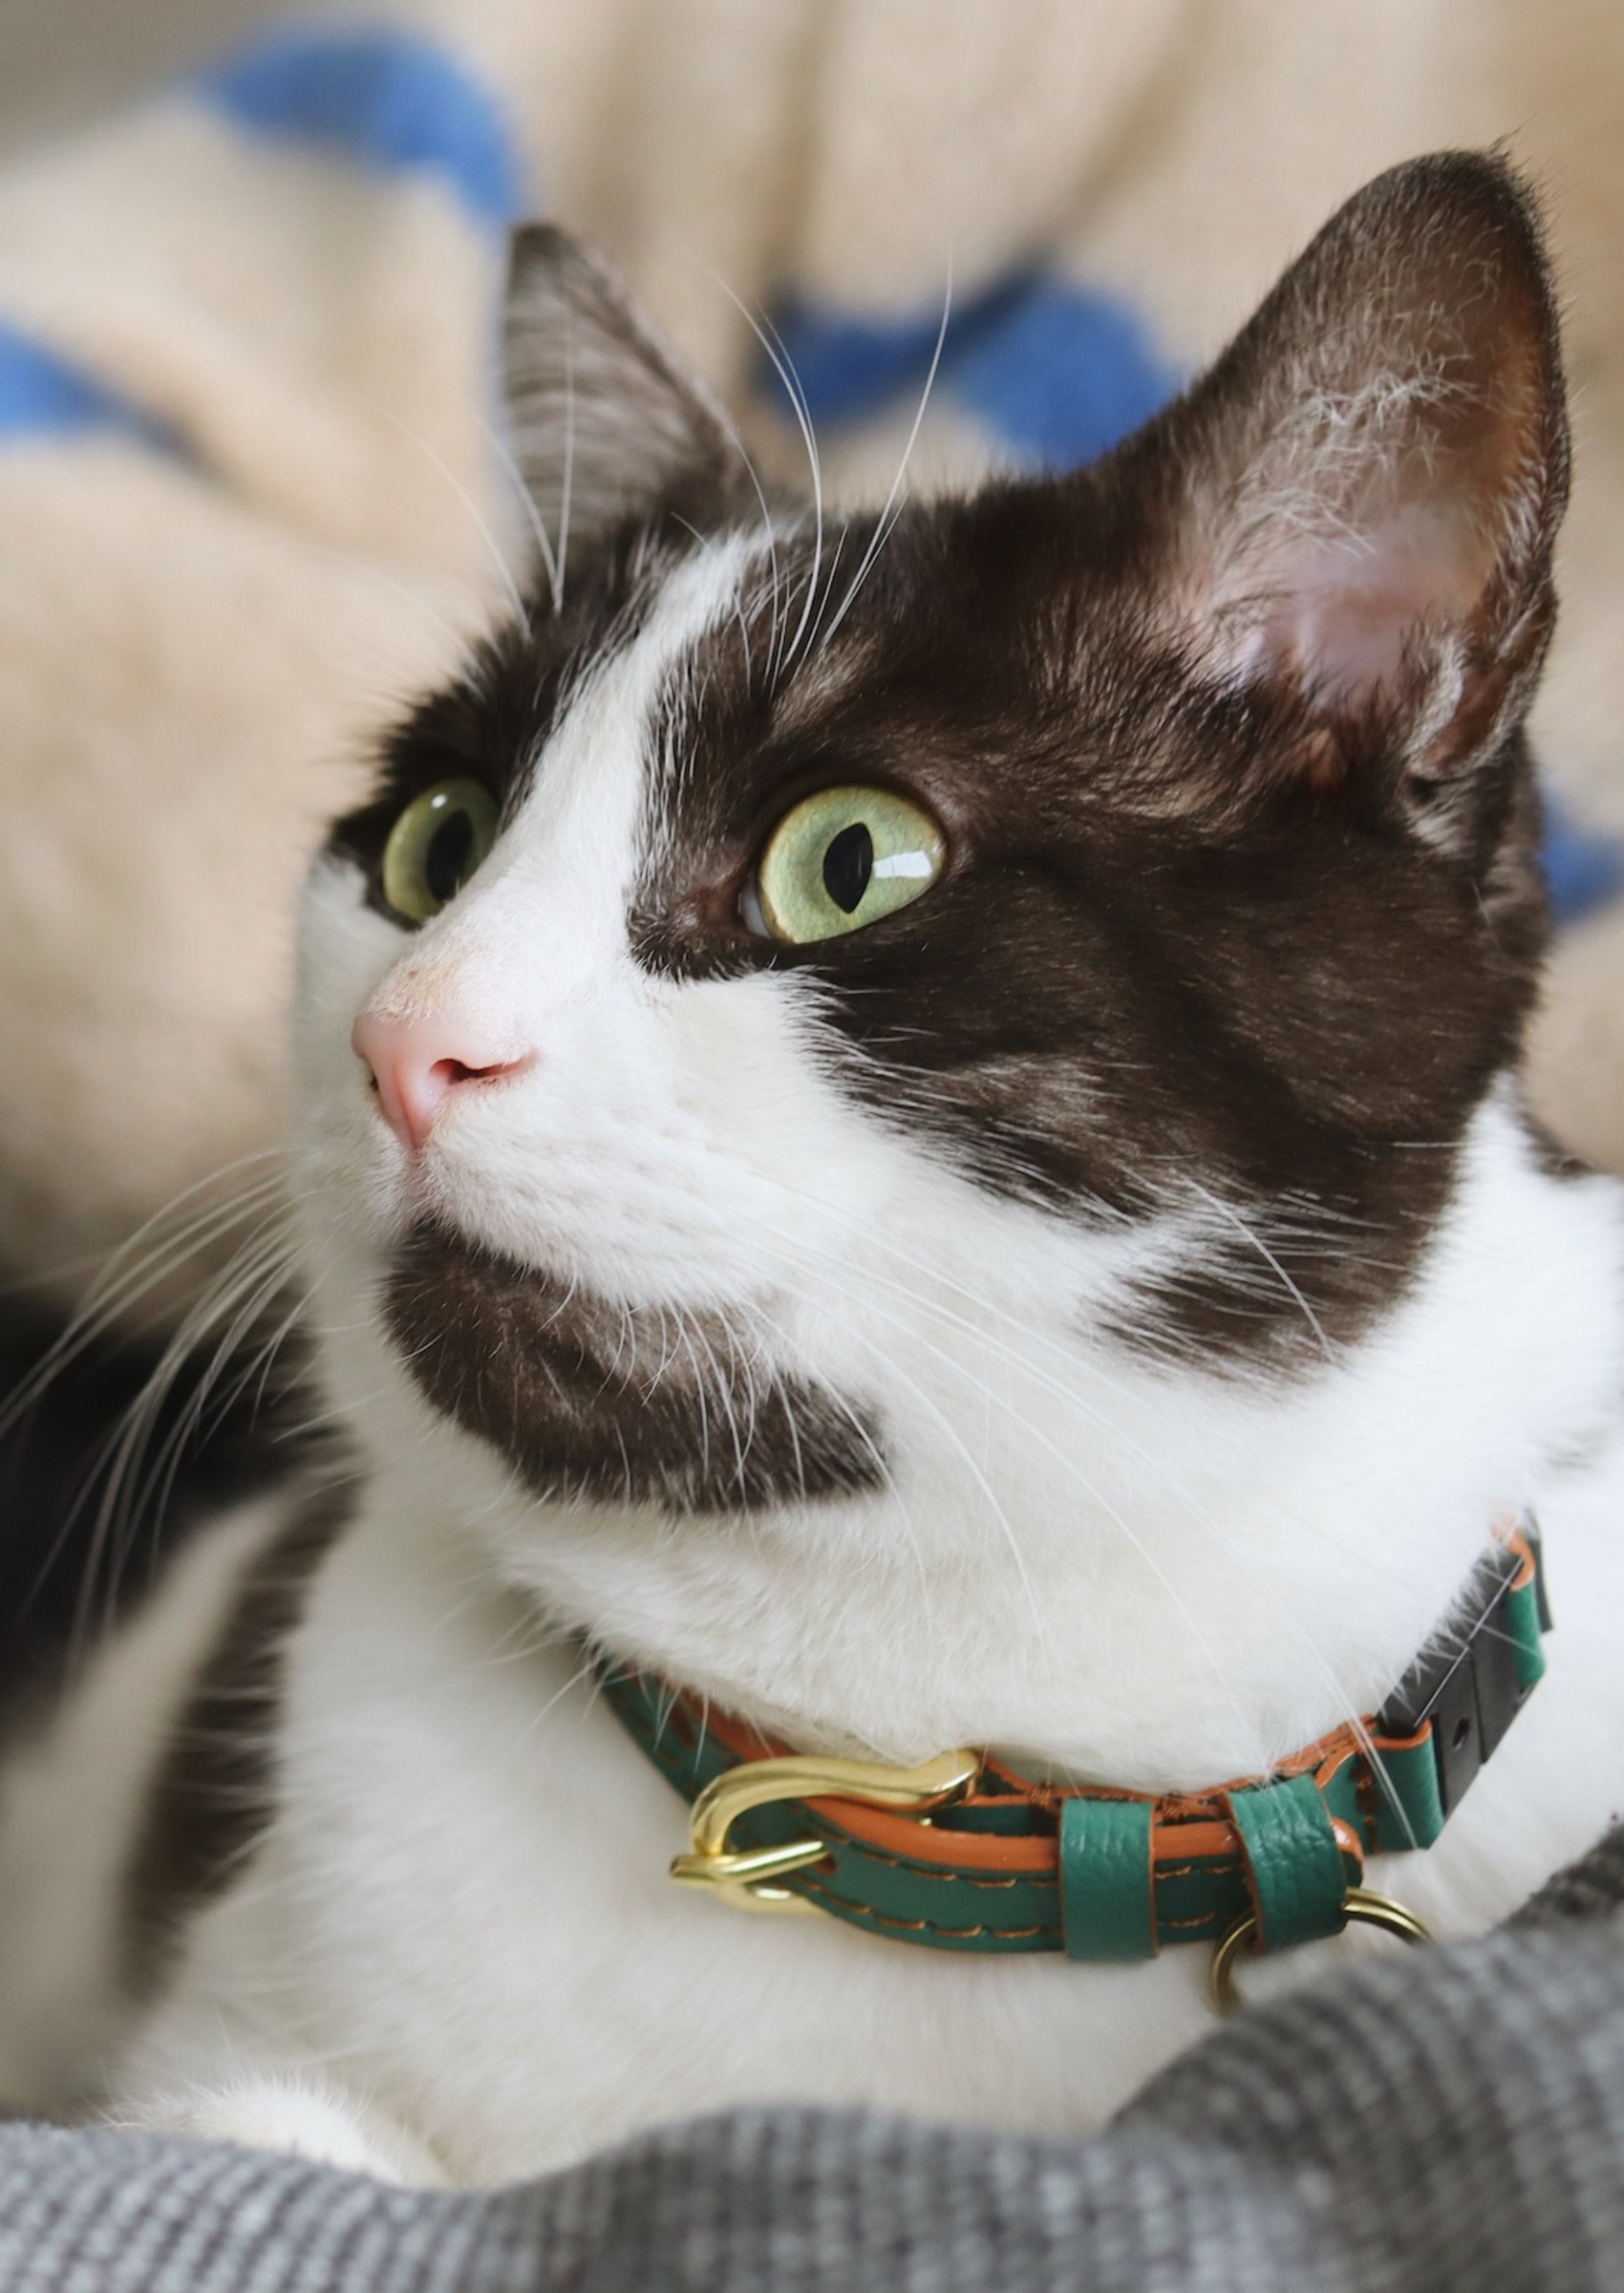 Adjustable Quick-Release Leather Cat Collar | Green Shady